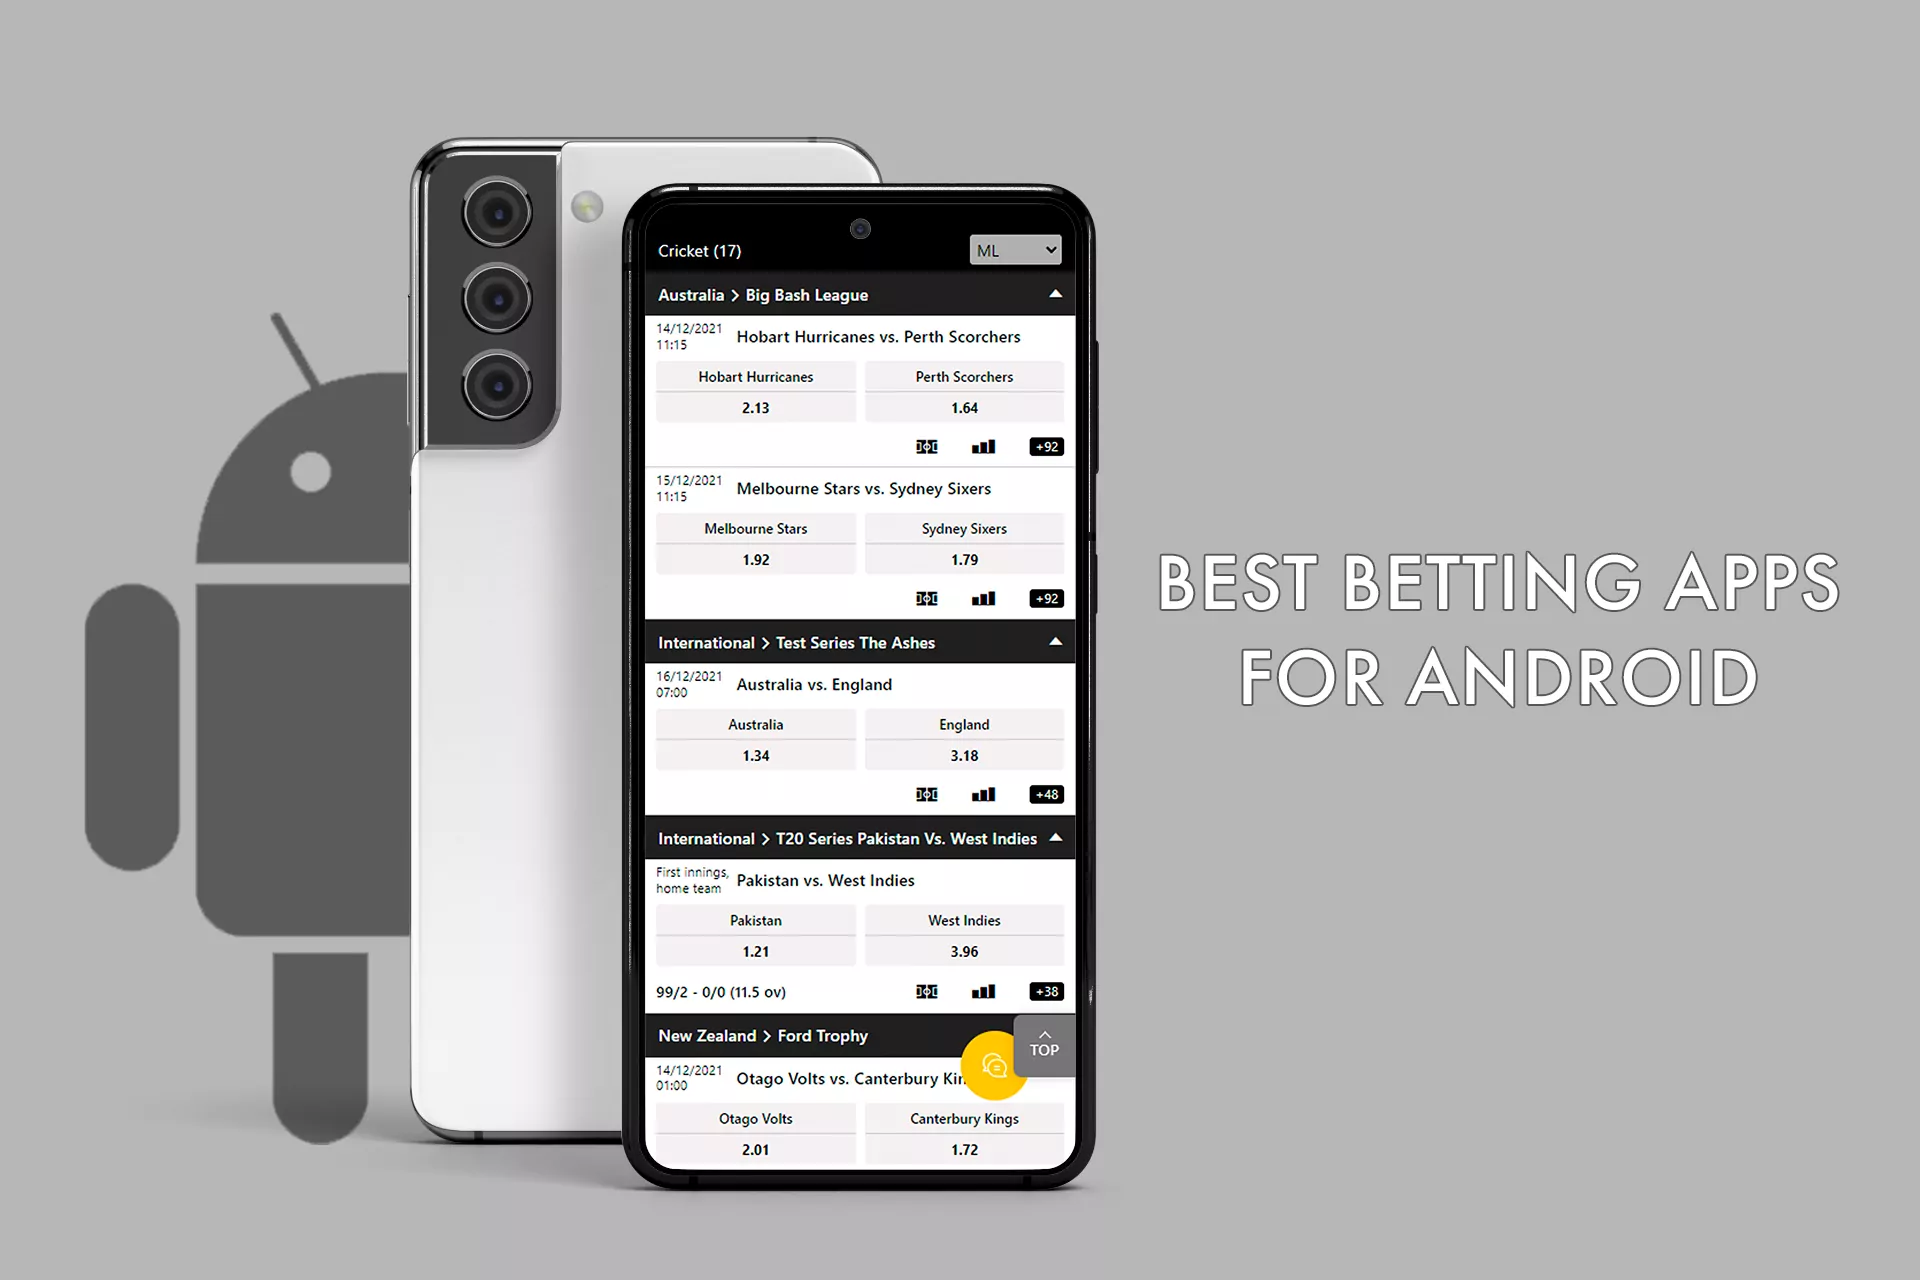 For readers who use an Android device, Bettingonlinebd made a top list of the best betting apps for android devices.